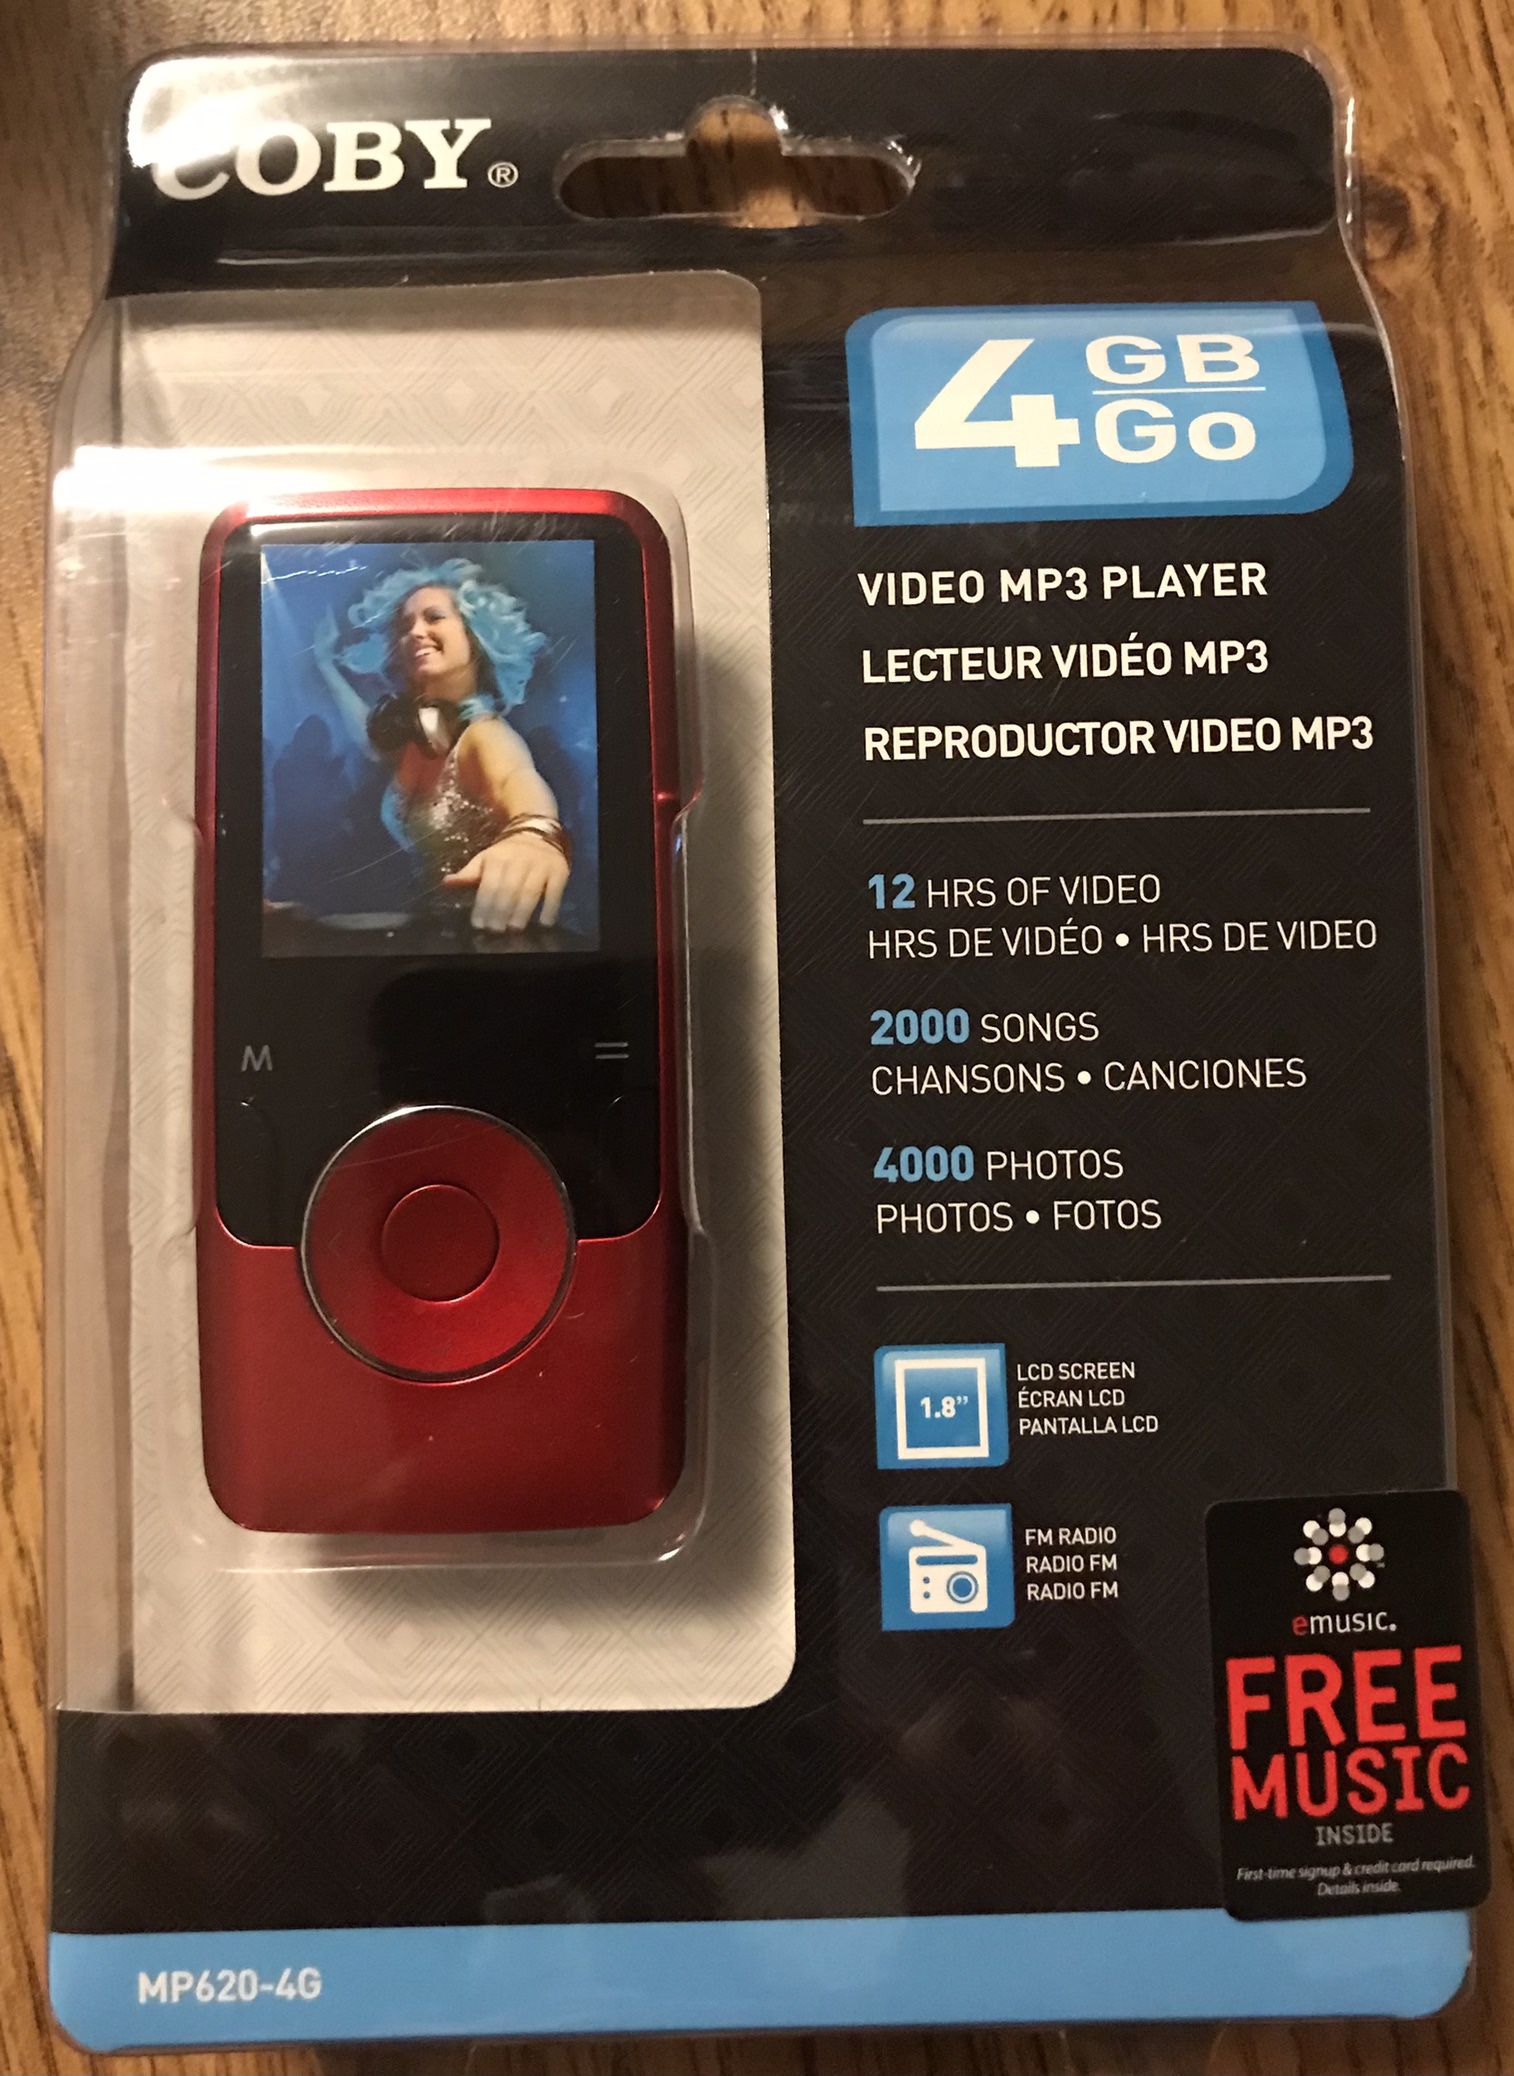 Coby 4GB MP3 Video Player